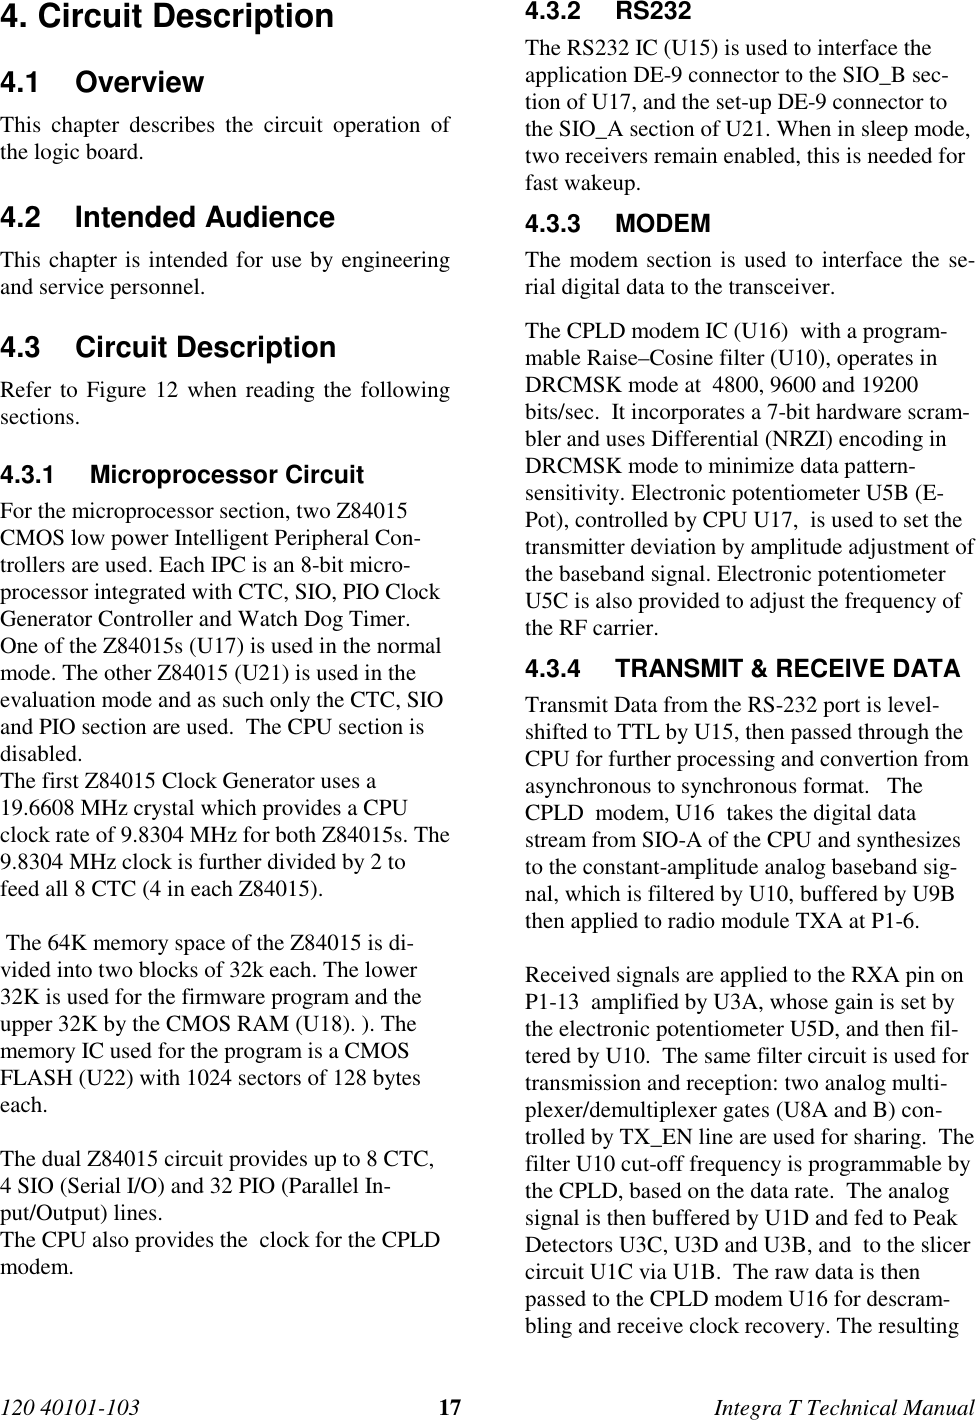 120 40101-103 17 Integra T Technical Manual4. Circuit Description4.1 OverviewThis chapter describes the circuit operation ofthe logic board.4.2 Intended AudienceThis chapter is intended for use by engineeringand service personnel.4.3 Circuit DescriptionRefer to Figure 12 when reading the followingsections.4.3.1 Microprocessor CircuitFor the microprocessor section, two Z84015CMOS low power Intelligent Peripheral Con-trollers are used. Each IPC is an 8-bit micro-processor integrated with CTC, SIO, PIO ClockGenerator Controller and Watch Dog Timer.One of the Z84015s (U17) is used in the normalmode. The other Z84015 (U21) is used in theevaluation mode and as such only the CTC, SIOand PIO section are used.  The CPU section isdisabled.The first Z84015 Clock Generator uses a19.6608 MHz crystal which provides a CPUclock rate of 9.8304 MHz for both Z84015s. The9.8304 MHz clock is further divided by 2 tofeed all 8 CTC (4 in each Z84015). The 64K memory space of the Z84015 is di-vided into two blocks of 32k each. The lower32K is used for the firmware program and theupper 32K by the CMOS RAM (U18). ). Thememory IC used for the program is a CMOSFLASH (U22) with 1024 sectors of 128 byteseach.The dual Z84015 circuit provides up to 8 CTC,4 SIO (Serial I/O) and 32 PIO (Parallel In-put/Output) lines.The CPU also provides the  clock for the CPLDmodem.4.3.2 RS232The RS232 IC (U15) is used to interface theapplication DE-9 connector to the SIO_B sec-tion of U17, and the set-up DE-9 connector tothe SIO_A section of U21. When in sleep mode,two receivers remain enabled, this is needed forfast wakeup.4.3.3 MODEMThe modem section is used to interface the se-rial digital data to the transceiver.The CPLD modem IC (U16)  with a program-mable Raise–Cosine filter (U10), operates inDRCMSK mode at  4800, 9600 and 19200bits/sec.  It incorporates a 7-bit hardware scram-bler and uses Differential (NRZI) encoding inDRCMSK mode to minimize data pattern-sensitivity. Electronic potentiometer U5B (E-Pot), controlled by CPU U17,  is used to set thetransmitter deviation by amplitude adjustment ofthe baseband signal. Electronic potentiometerU5C is also provided to adjust the frequency ofthe RF carrier.4.3.4  TRANSMIT &amp; RECEIVE DATATransmit Data from the RS-232 port is level-shifted to TTL by U15, then passed through theCPU for further processing and convertion fromasynchronous to synchronous format.   TheCPLD  modem, U16  takes the digital datastream from SIO-A of the CPU and synthesizesto the constant-amplitude analog baseband sig-nal, which is filtered by U10, buffered by U9Bthen applied to radio module TXA at P1-6.Received signals are applied to the RXA pin onP1-13  amplified by U3A, whose gain is set bythe electronic potentiometer U5D, and then fil-tered by U10.  The same filter circuit is used fortransmission and reception: two analog multi-plexer/demultiplexer gates (U8A and B) con-trolled by TX_EN line are used for sharing.  Thefilter U10 cut-off frequency is programmable bythe CPLD, based on the data rate.  The analogsignal is then buffered by U1D and fed to PeakDetectors U3C, U3D and U3B, and  to the slicercircuit U1C via U1B.  The raw data is thenpassed to the CPLD modem U16 for descram-bling and receive clock recovery. The resulting